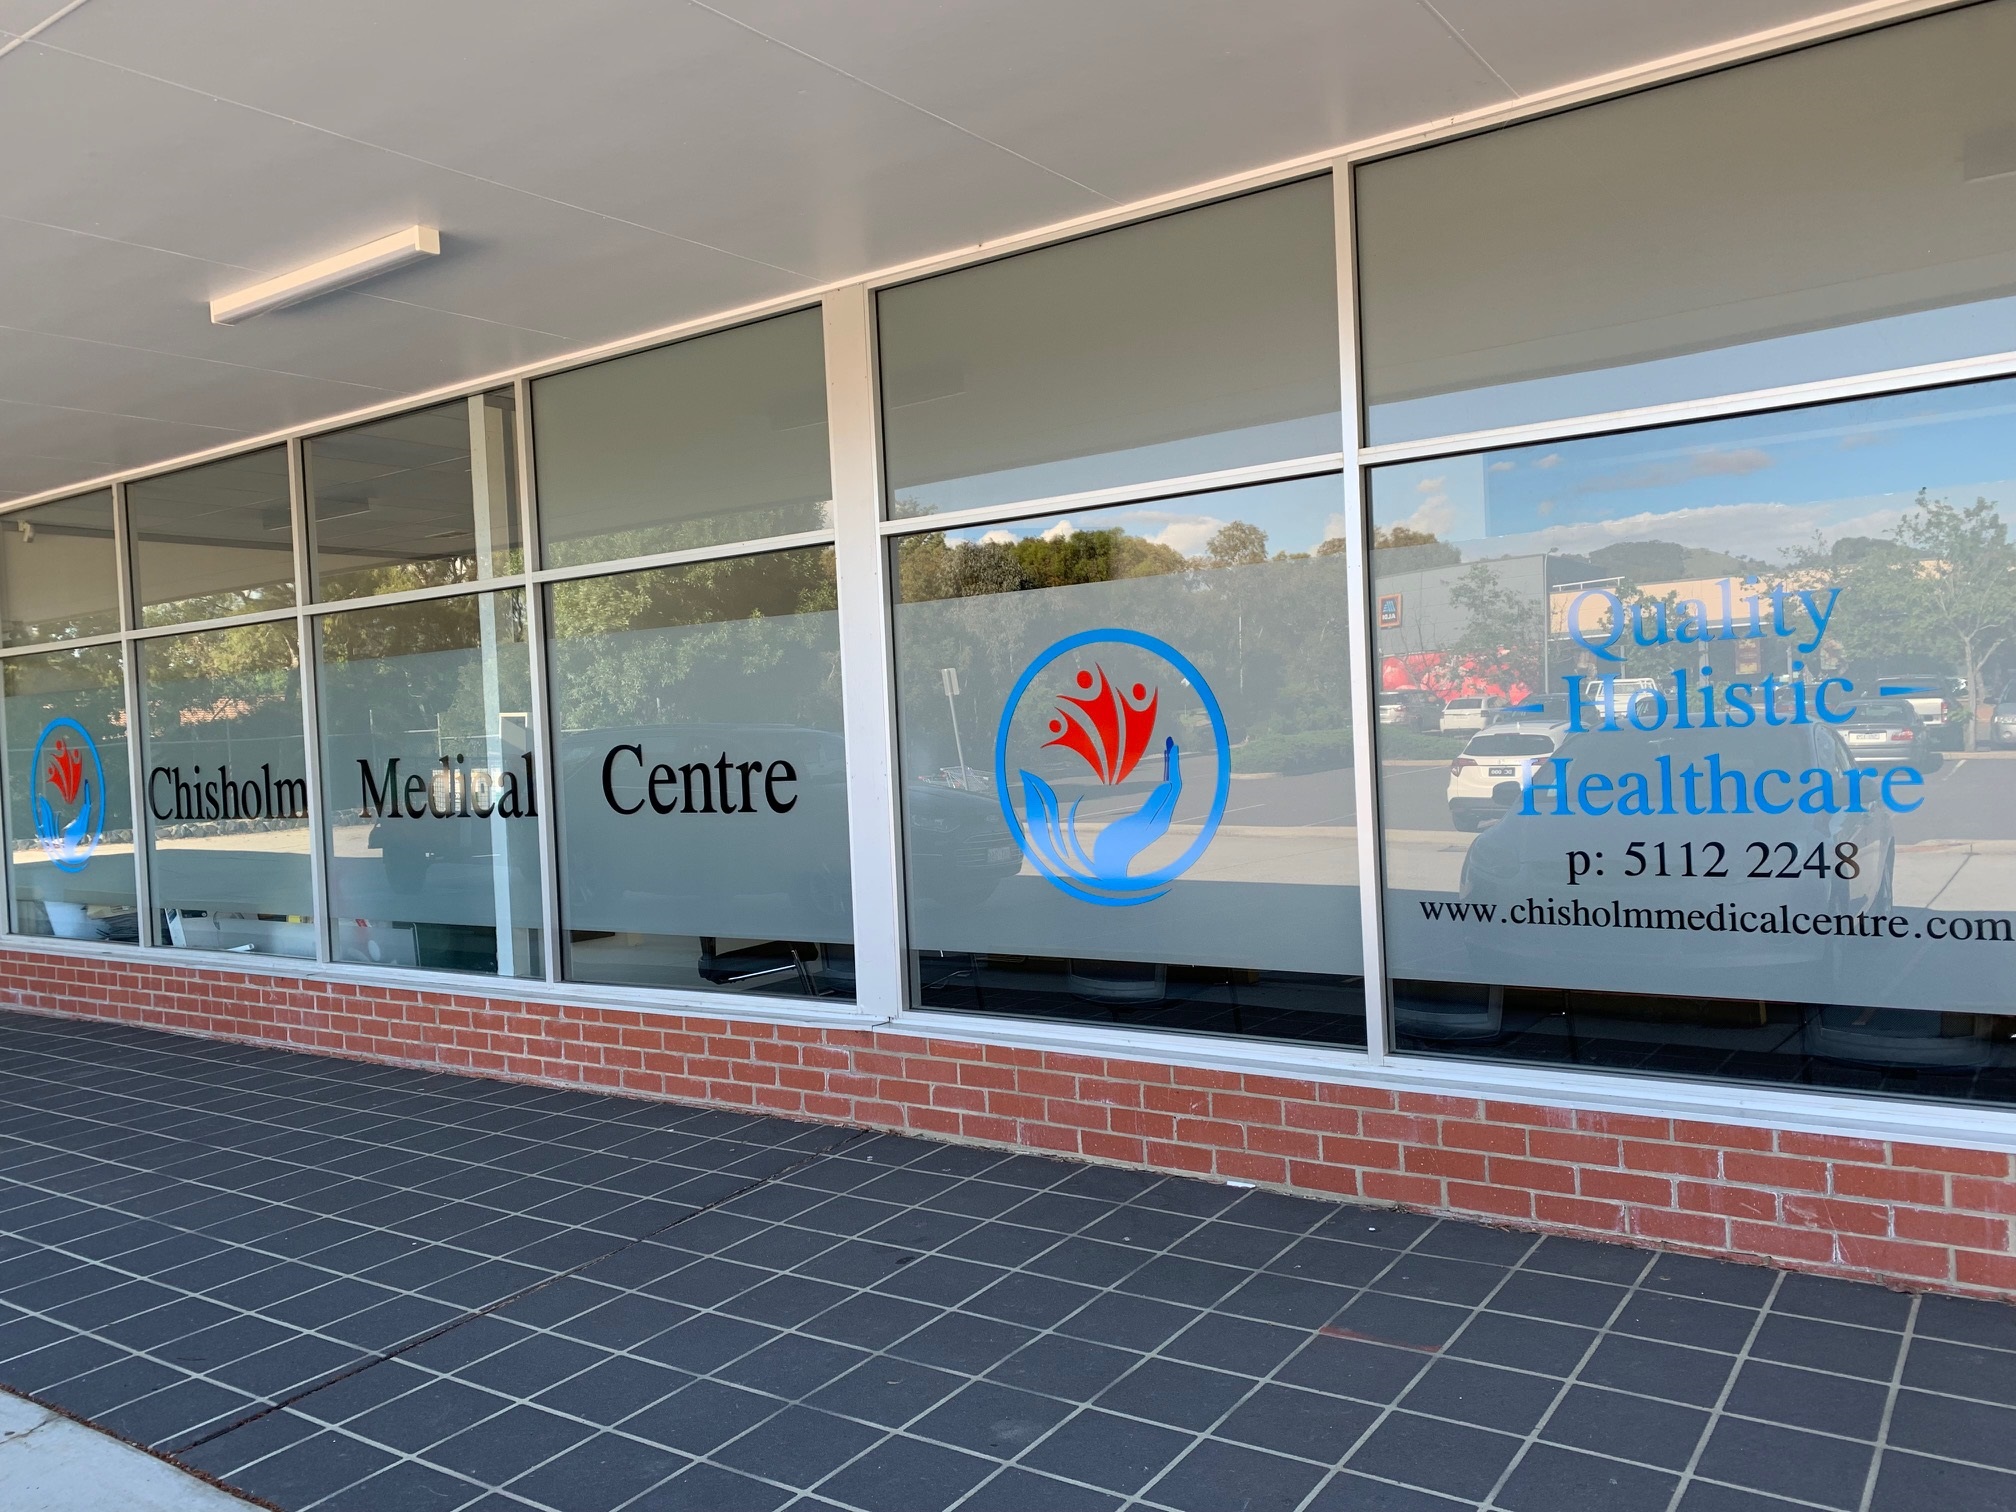 About Us - Chisholm Medical Centre